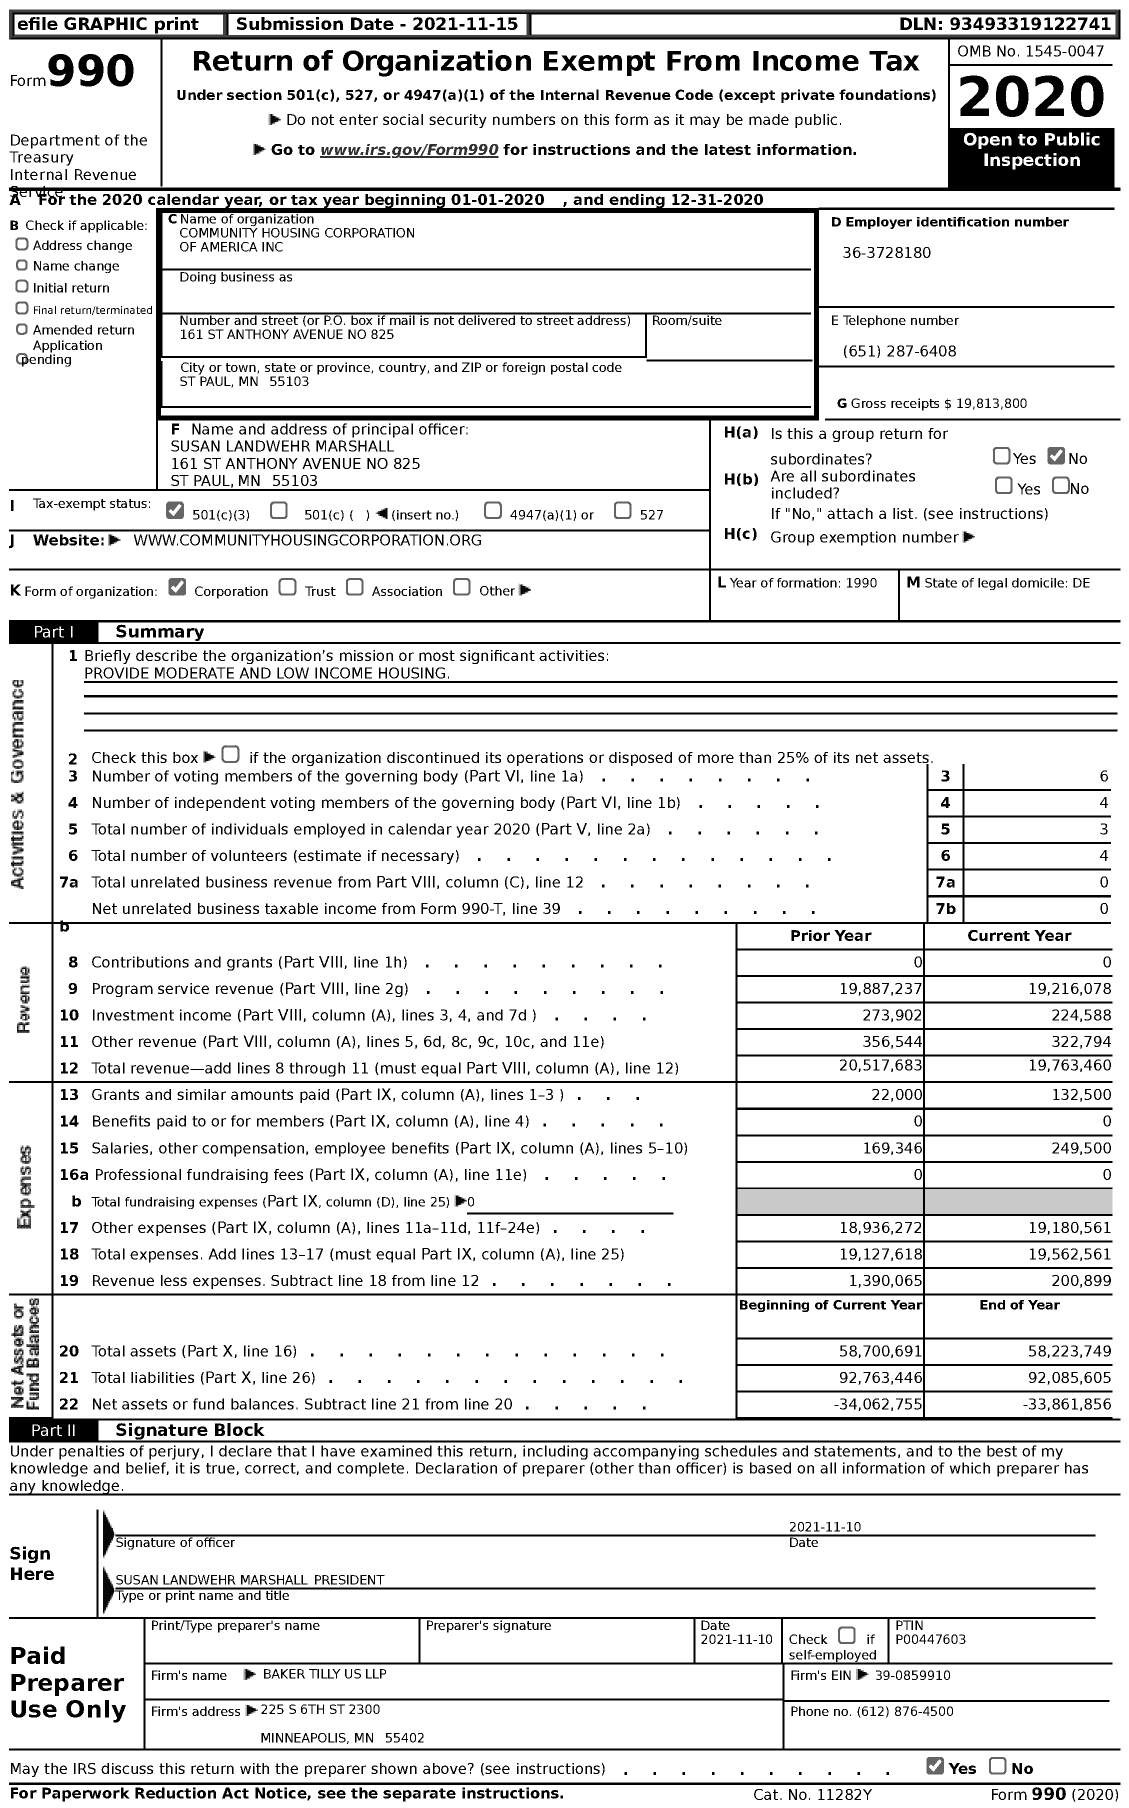 Image of first page of 2020 Form 990 for Community Housing Corporation of America (CHC)